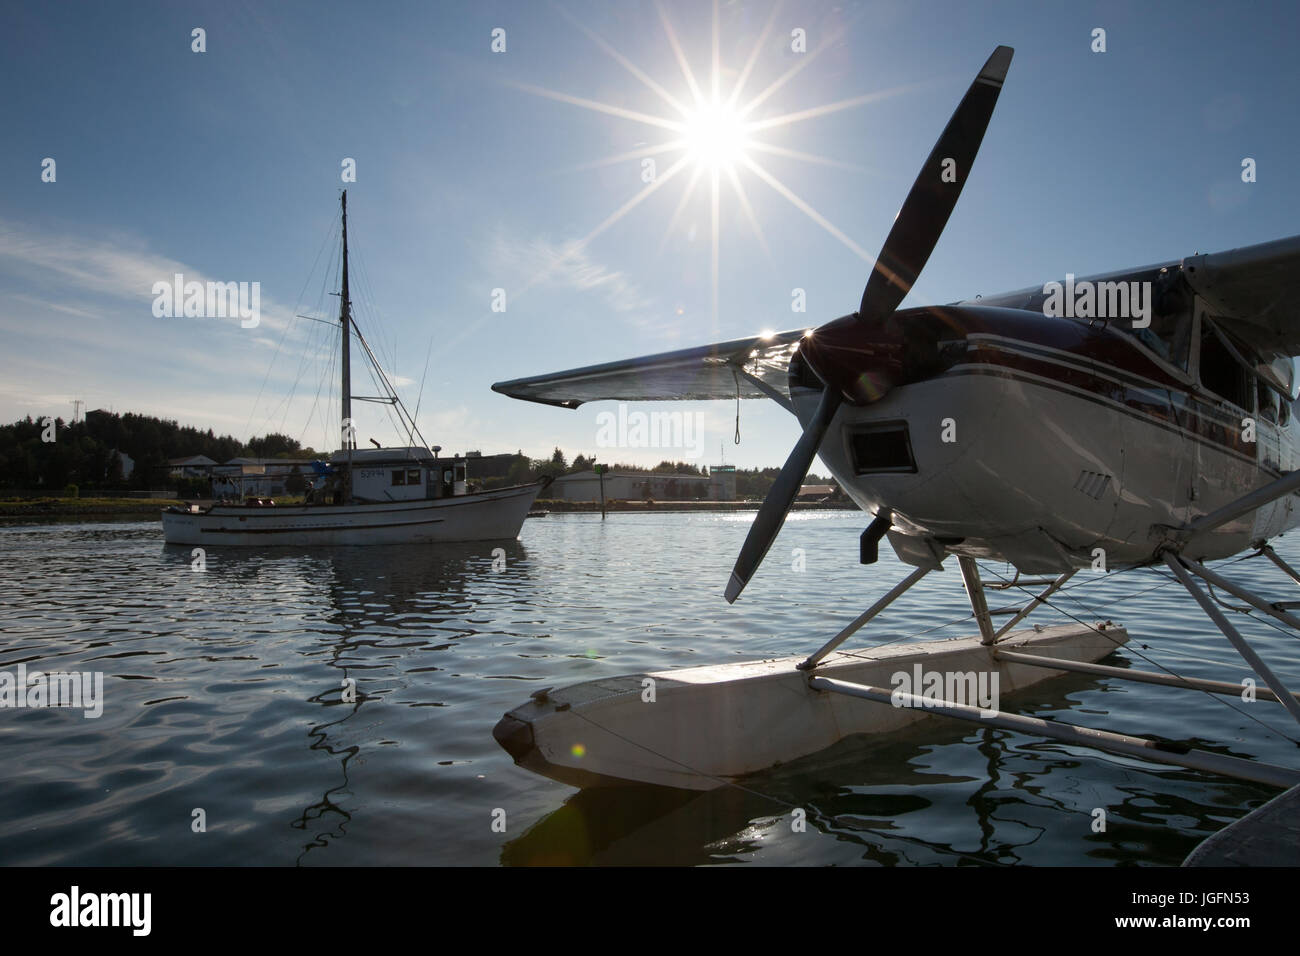 Under bright sun, a seaplane sits in the water near a passenger boat. Stock Photo